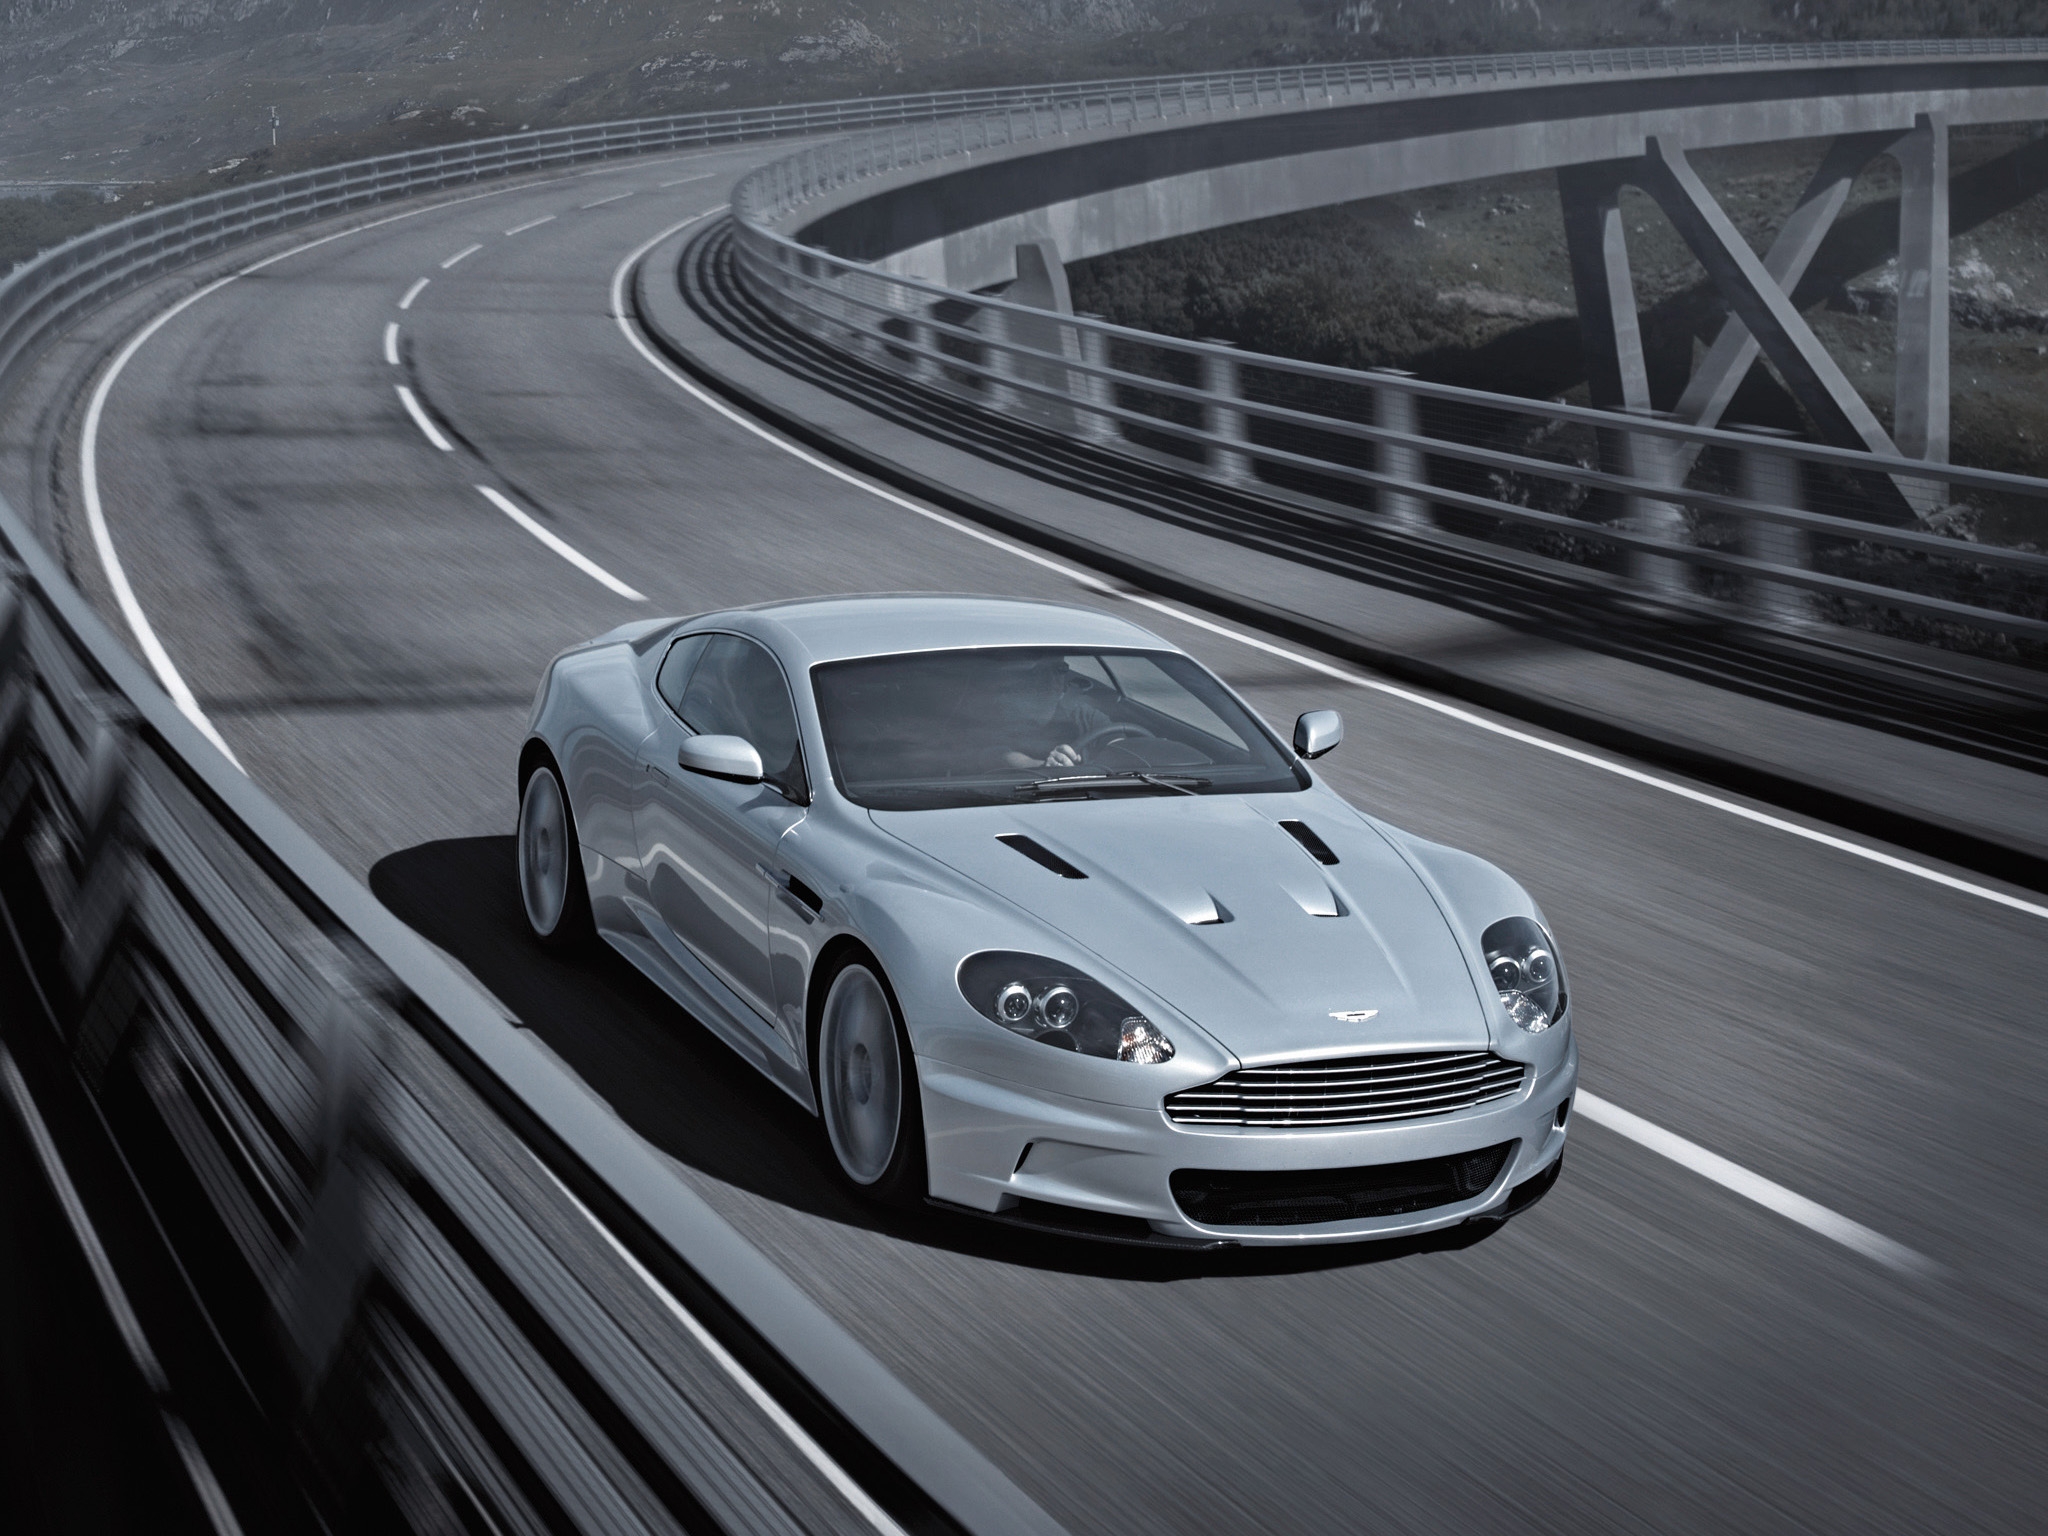 Free photo The Aston Martin Vanquish is driving on a country track.